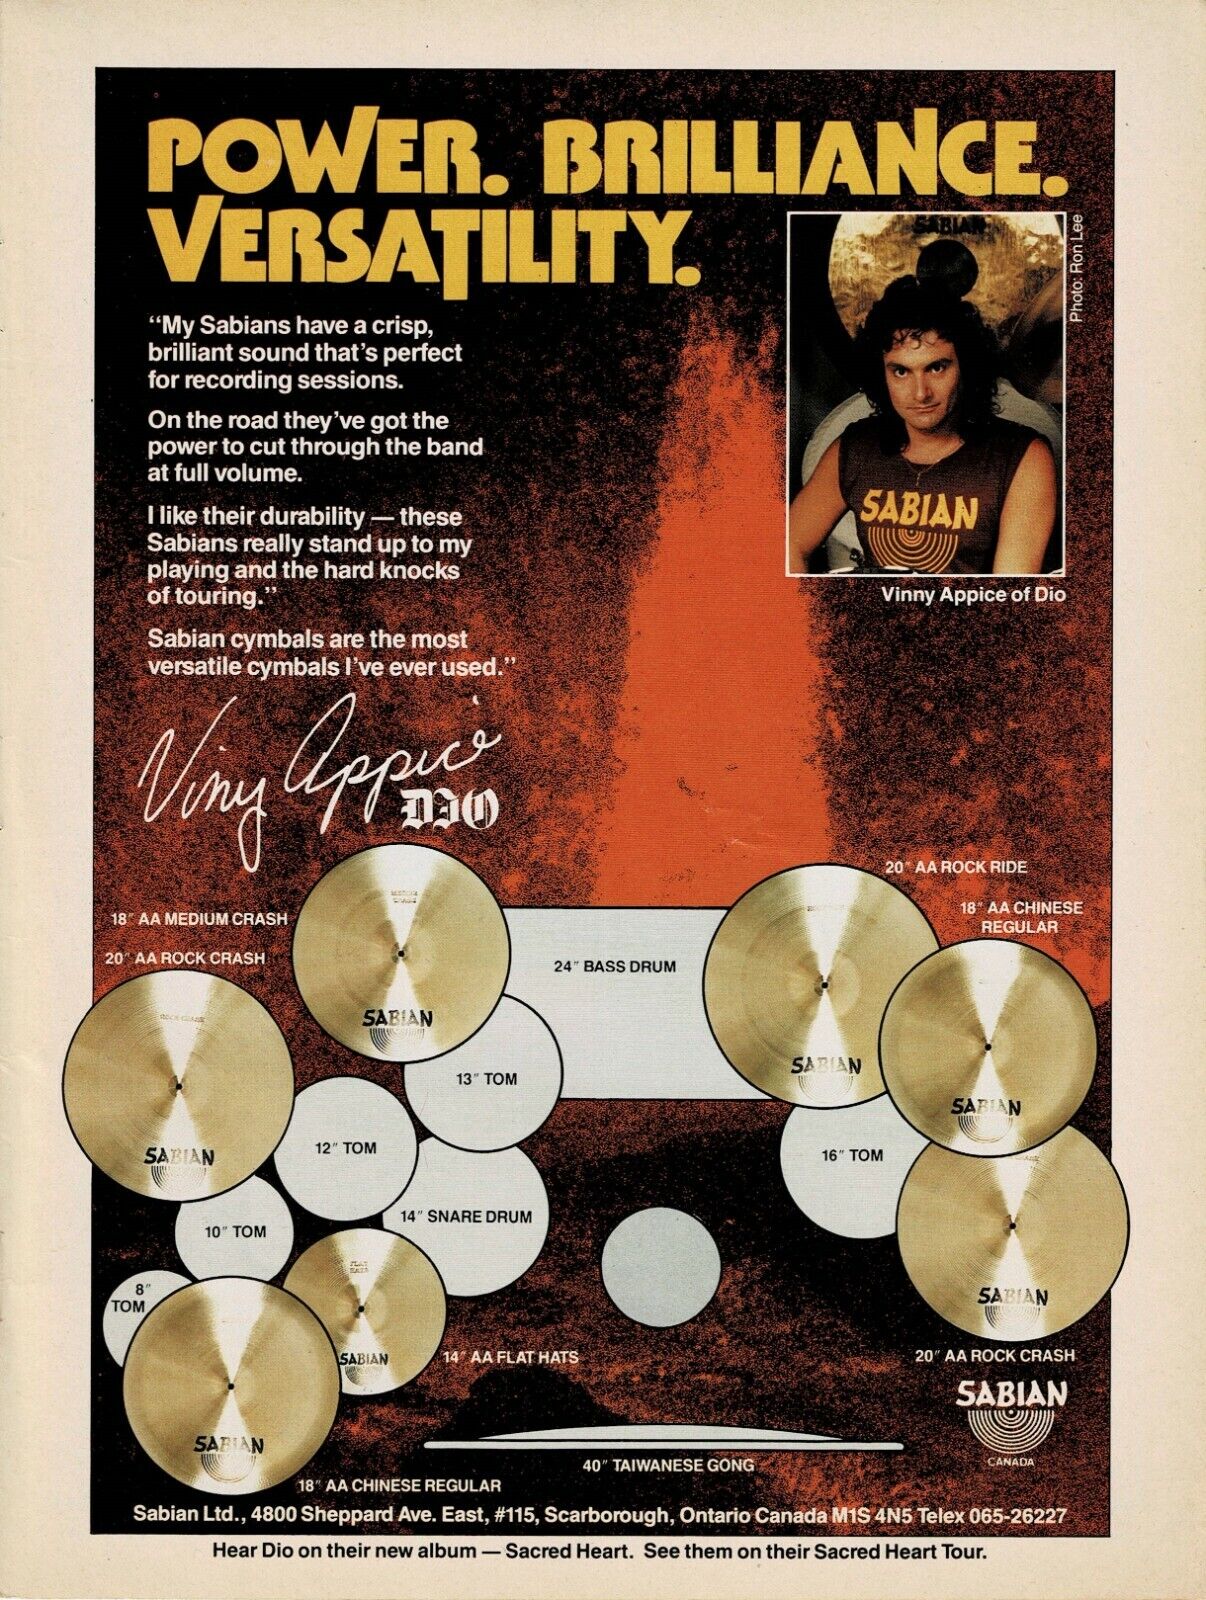 SABIAN CYMBALS - VINNY APPICE of DIO - 1986 Print Ad